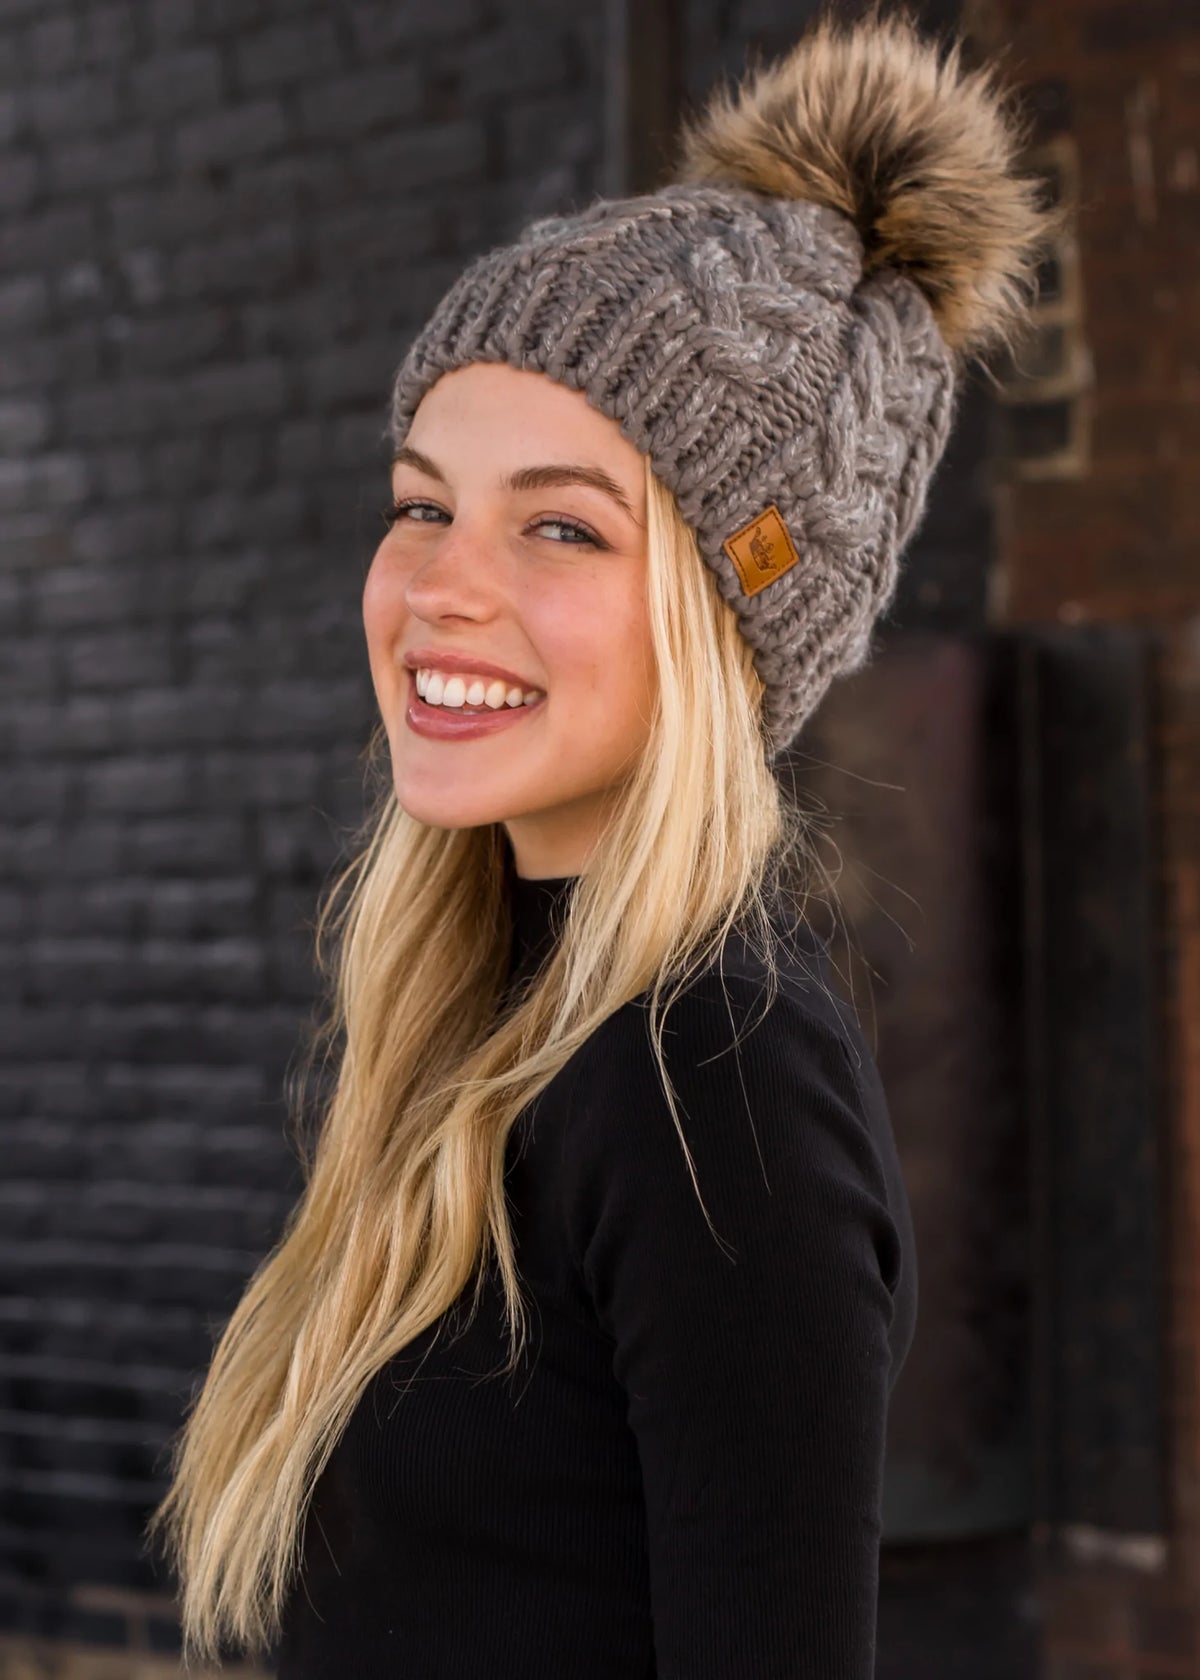 Marbled Grey Cable Knit Fleece Lined Hat